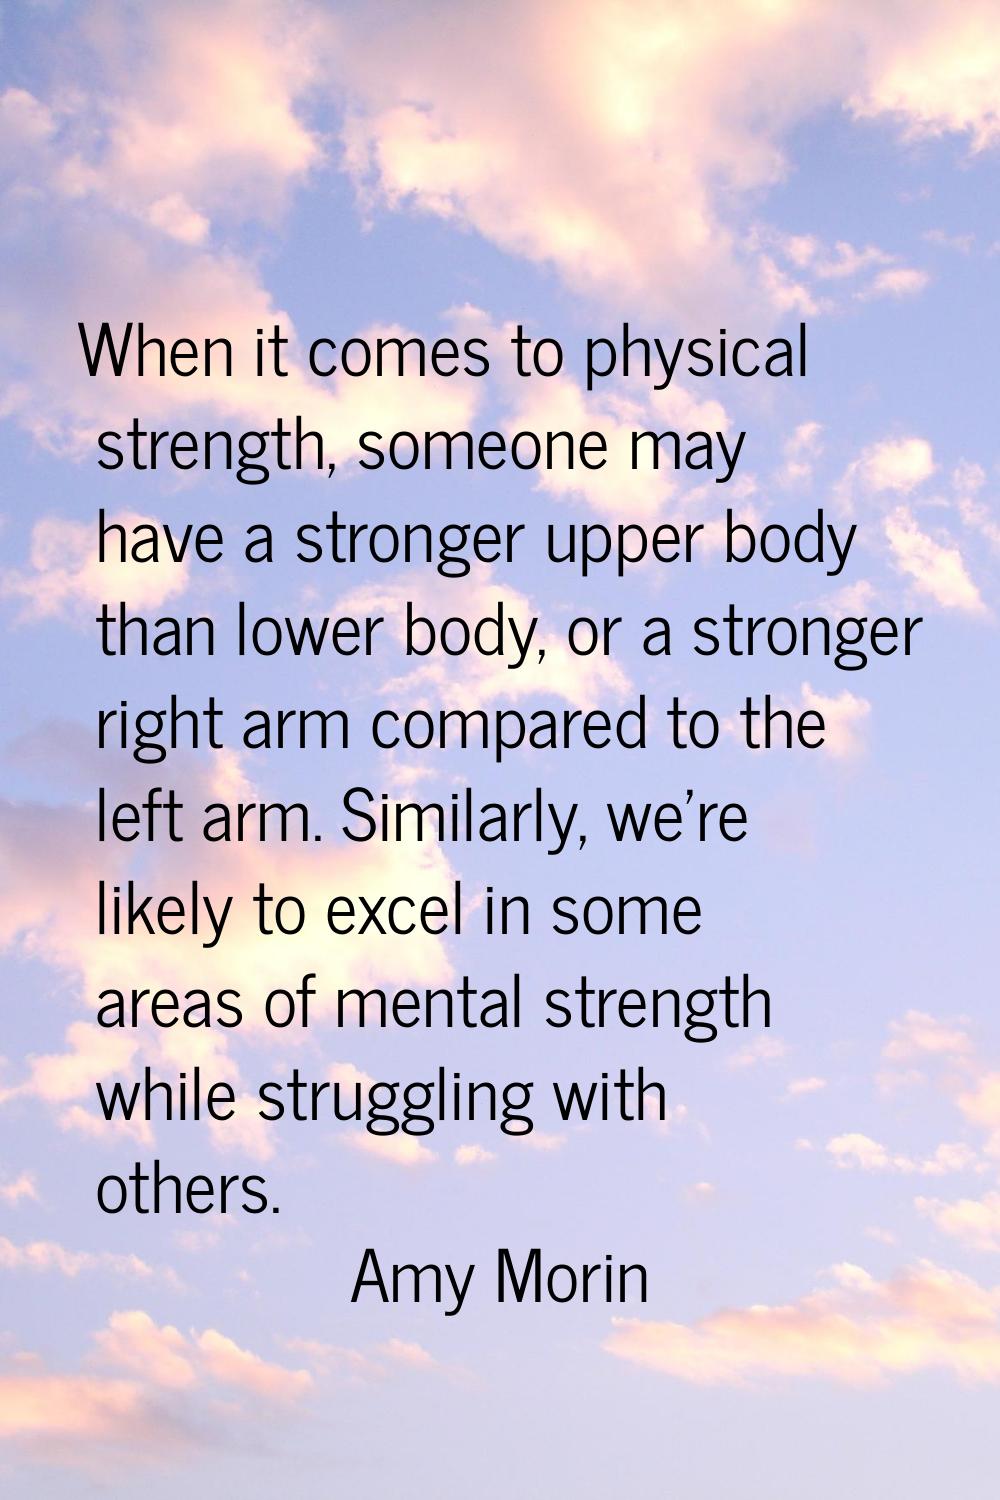 When it comes to physical strength, someone may have a stronger upper body than lower body, or a st